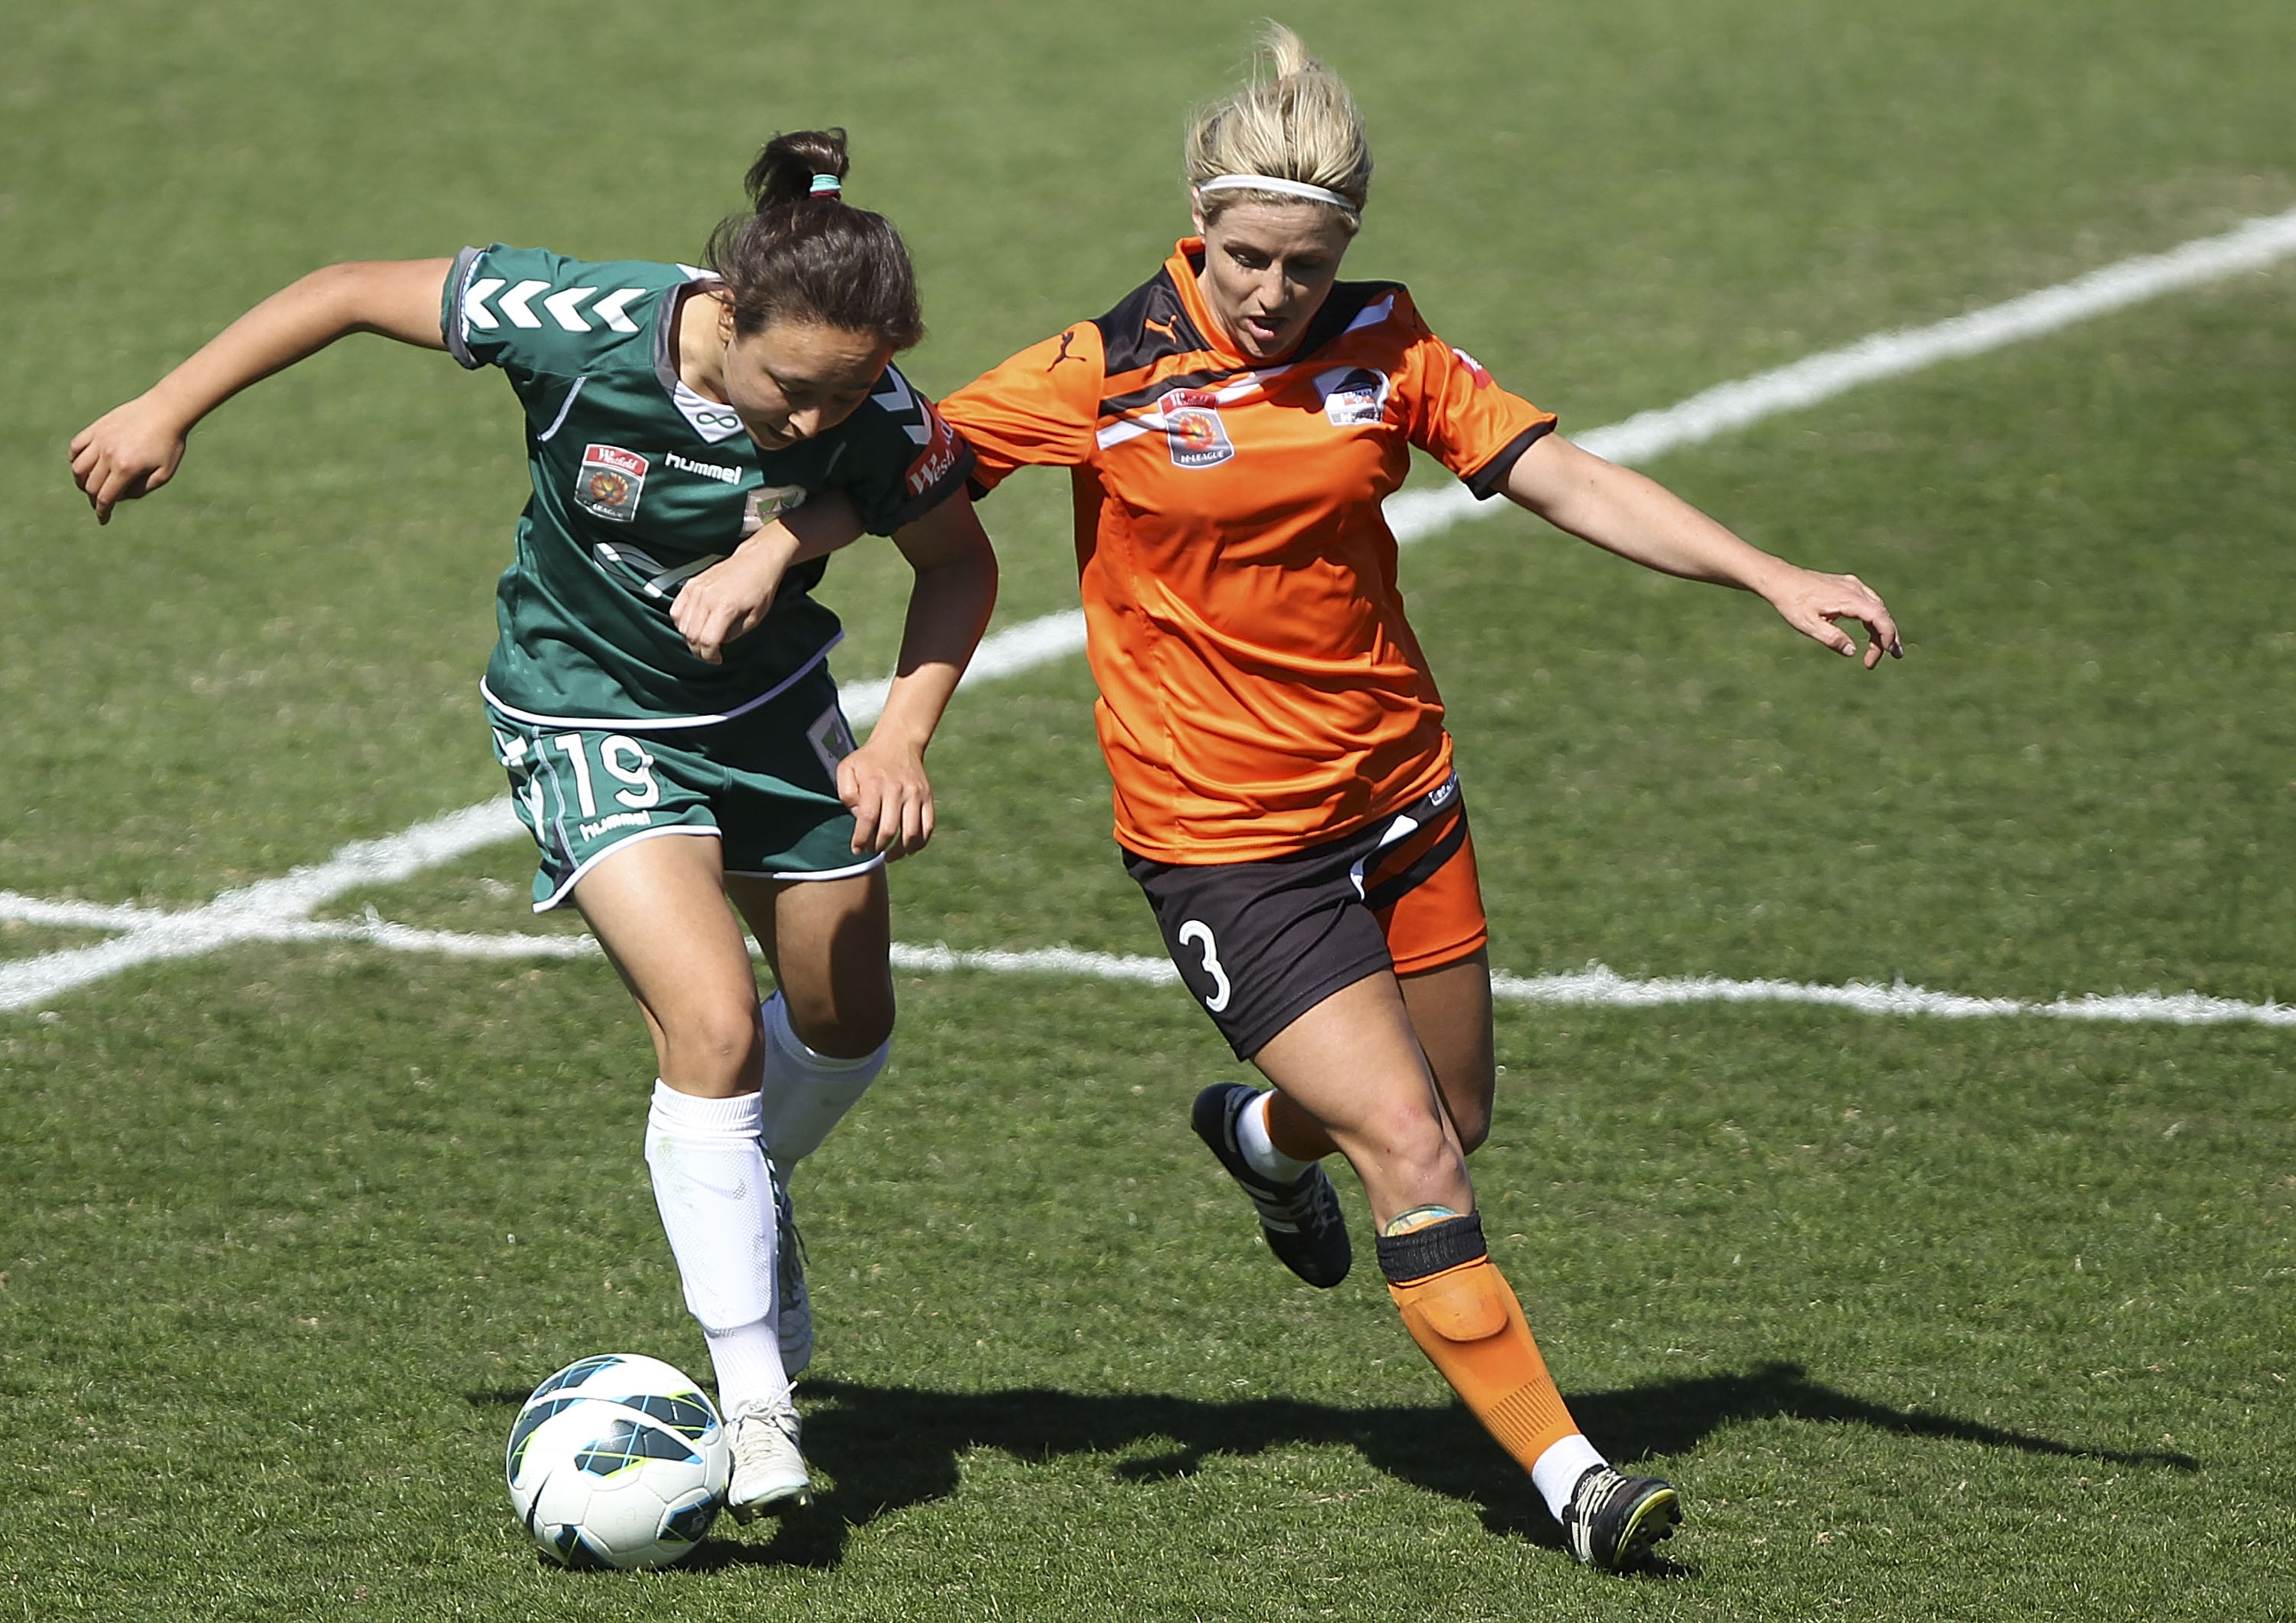 Chapman (right) is an Australian international and a member of the Strikers.